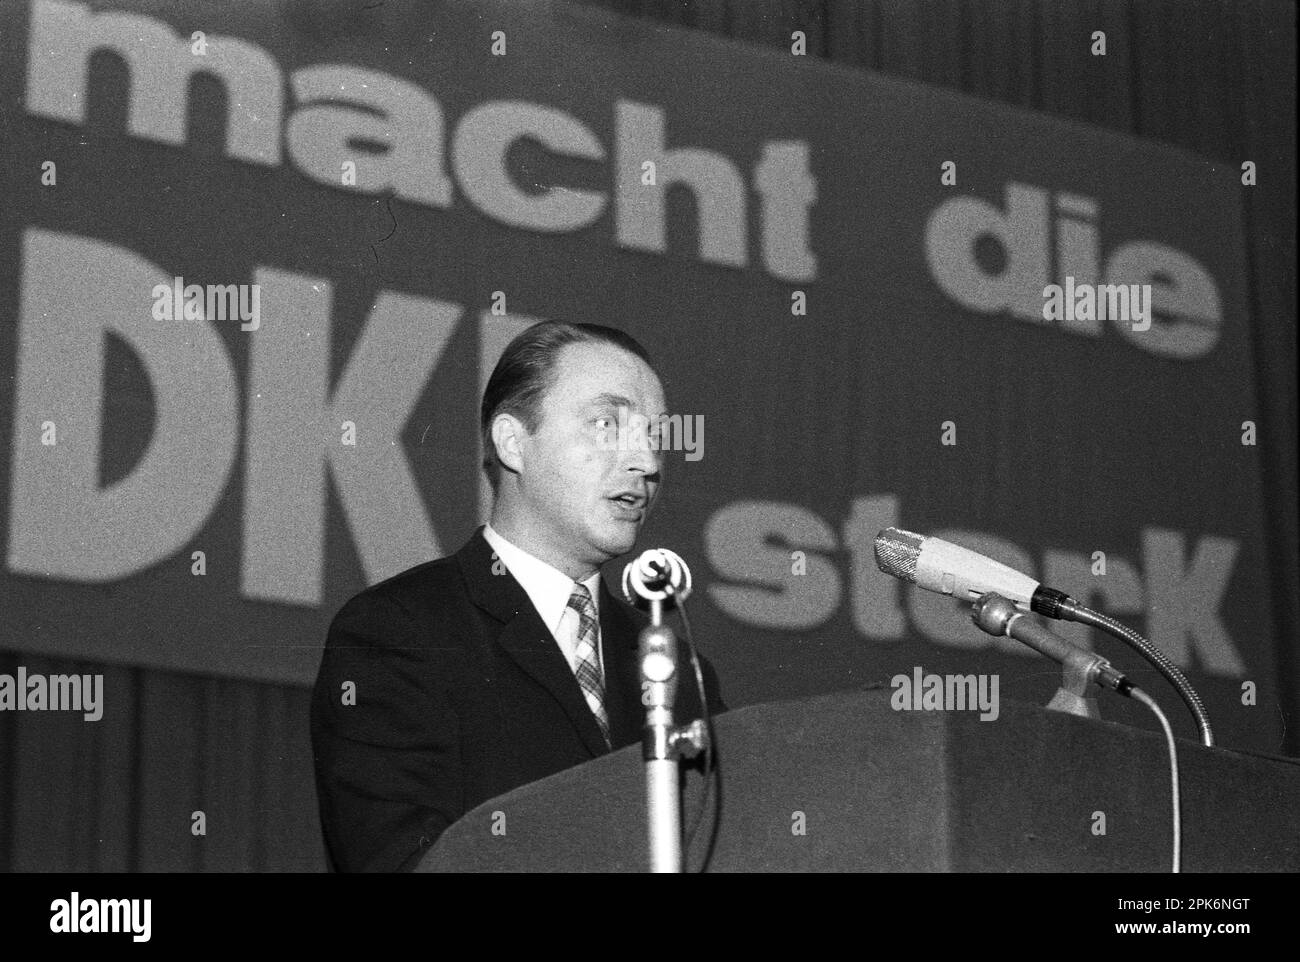 Personalities from politics, business and culture from the years 1965-71. Manfred Kapluck (DKP) d. 2014, DEU, Germany Stock Photo